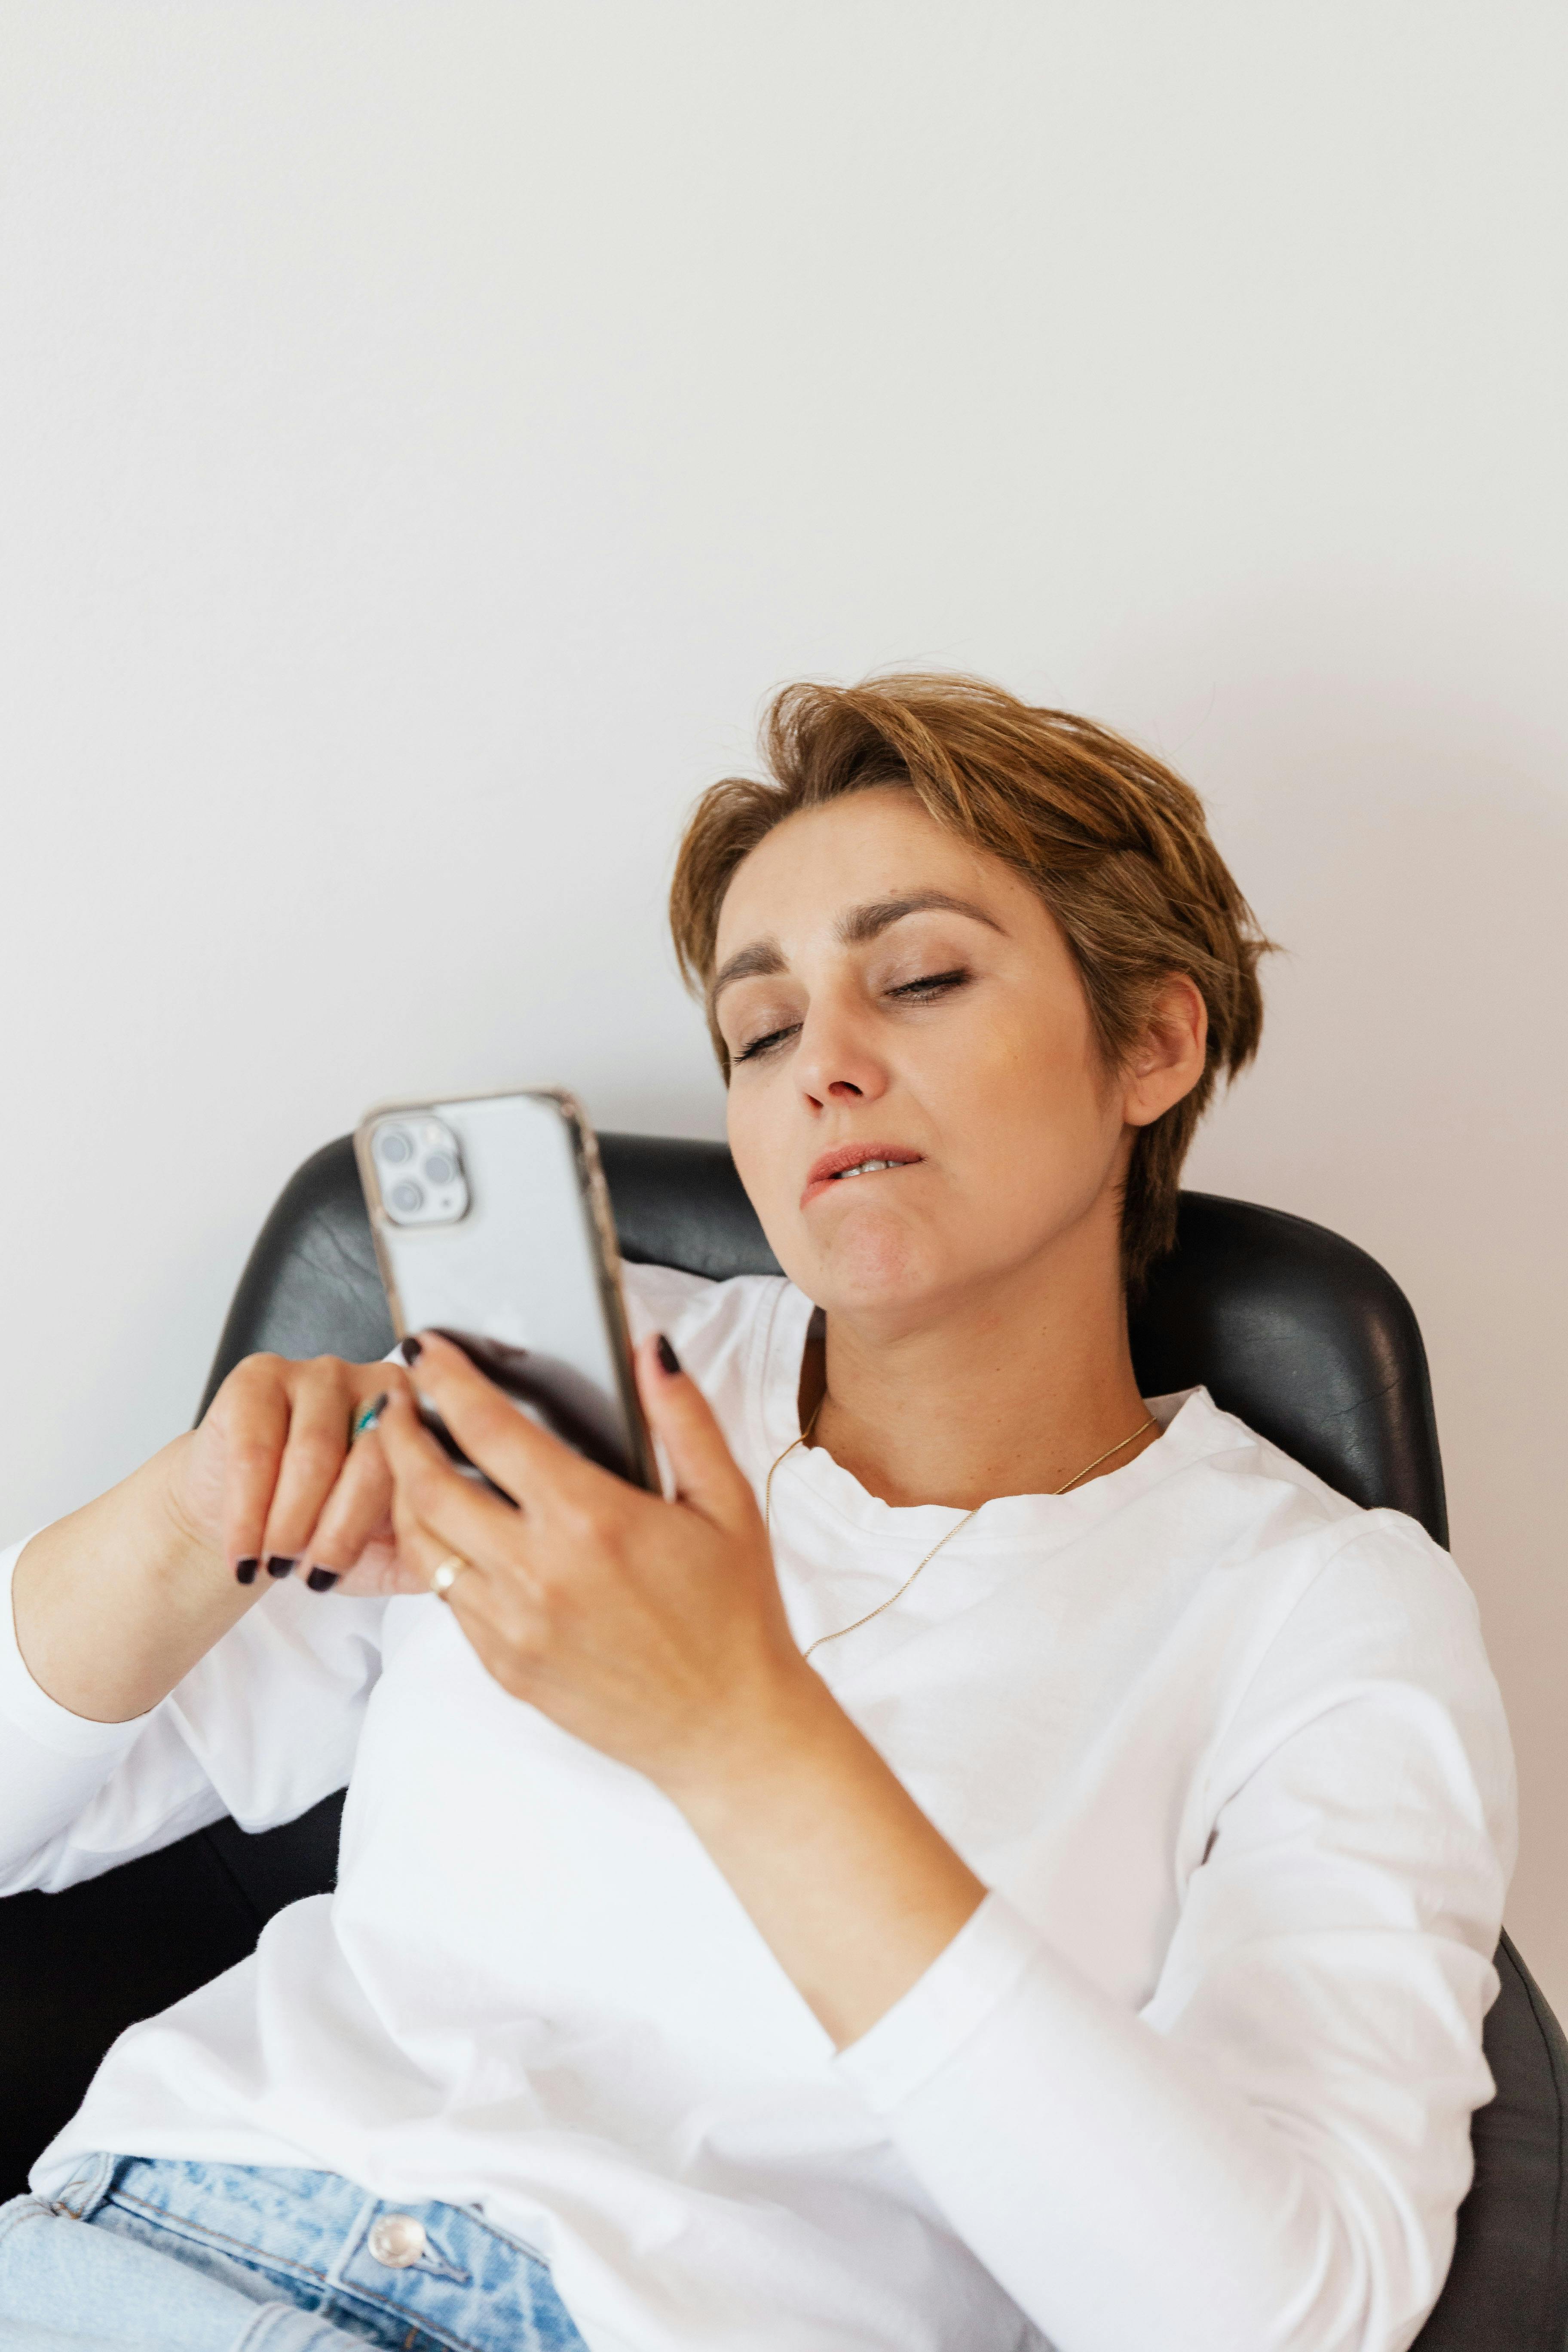 female browsing internet on smartphone while biting lip in armchair